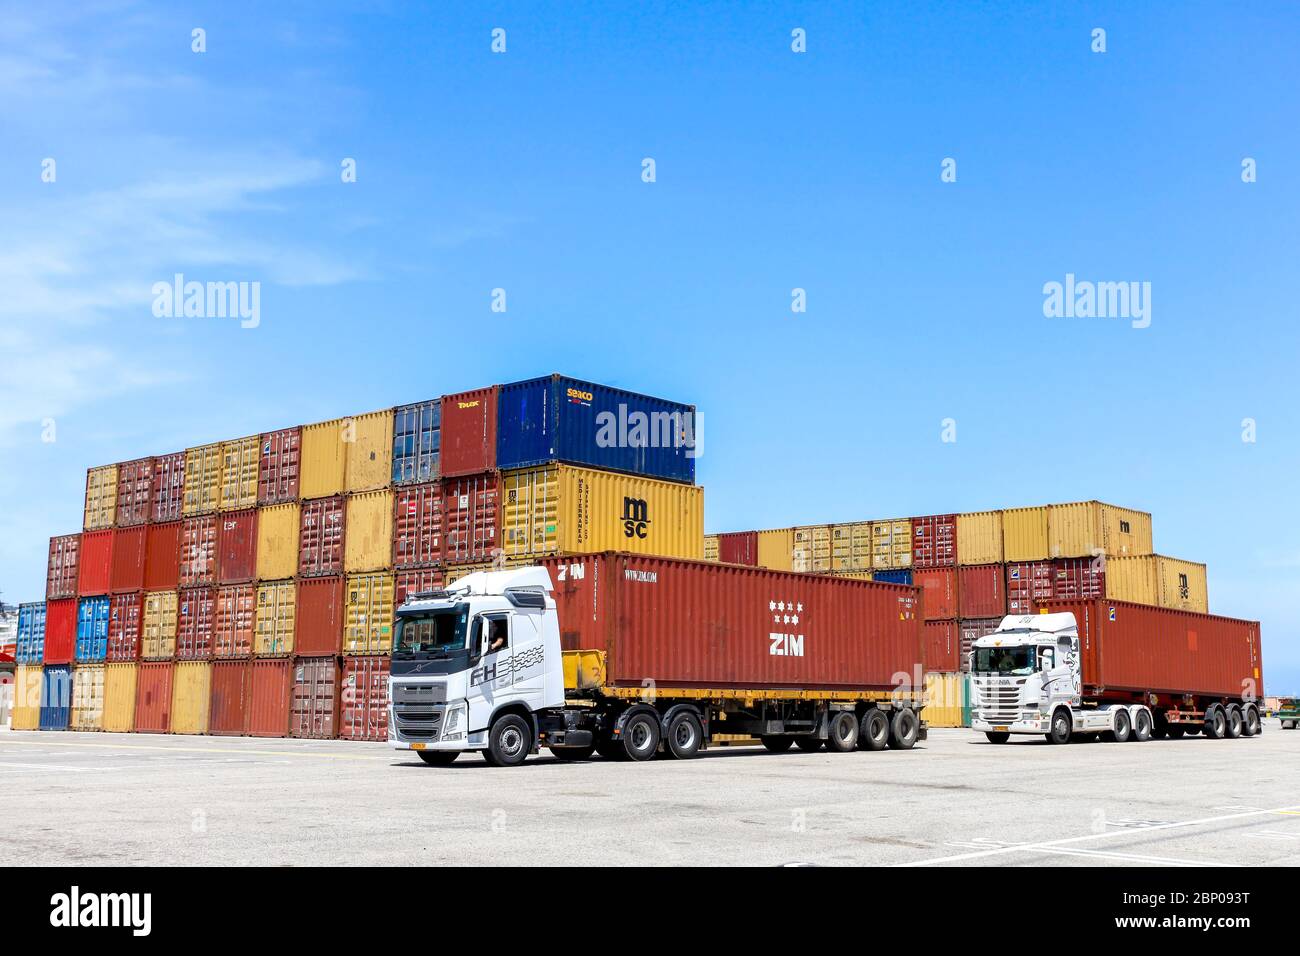 Truck loaded with a Zim shipping Container with stacks of various Container brands in the background. Stock Photo